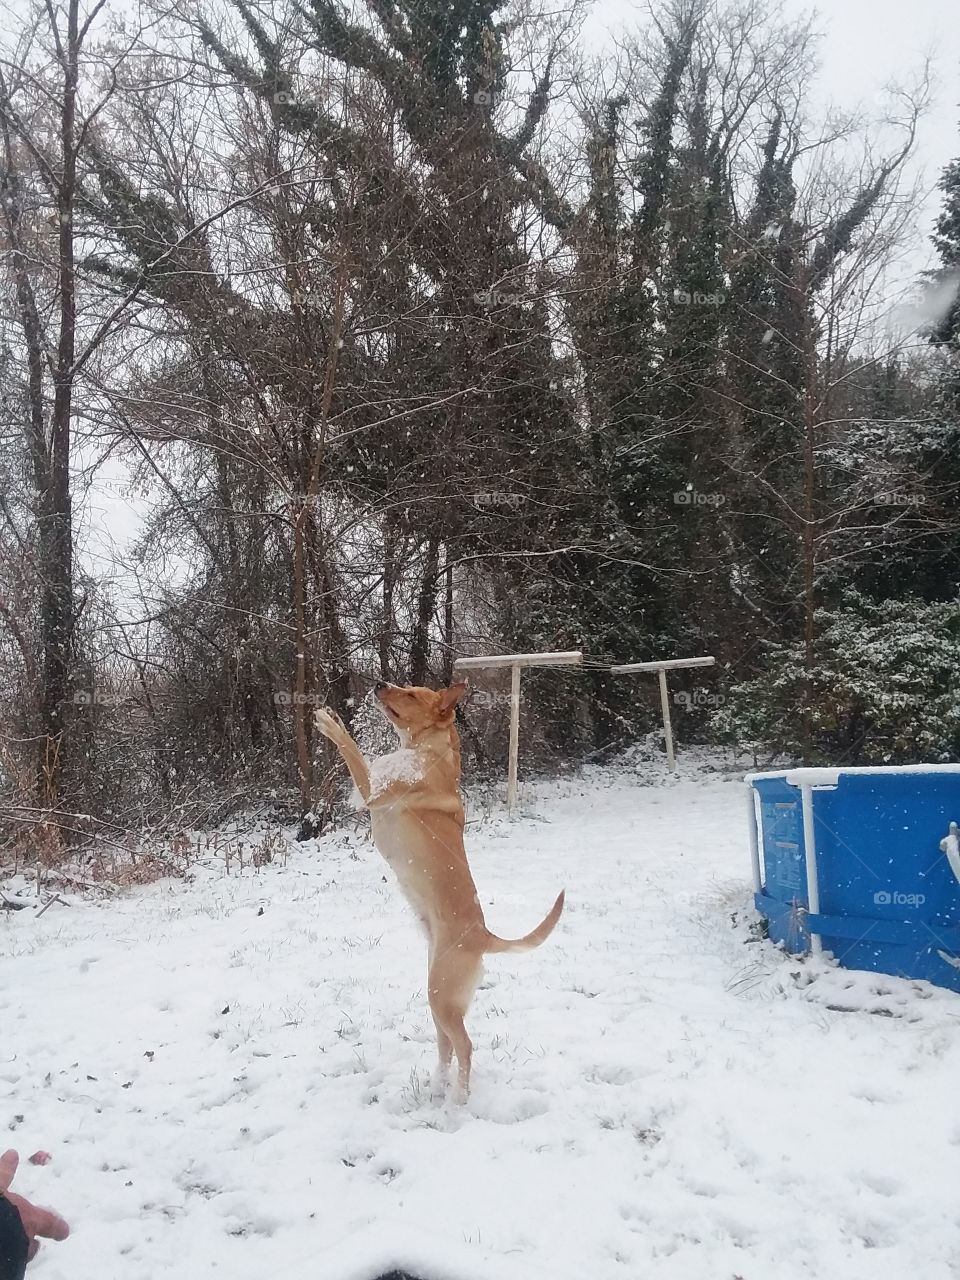 A dog waiting on her snowball tonne thrown.